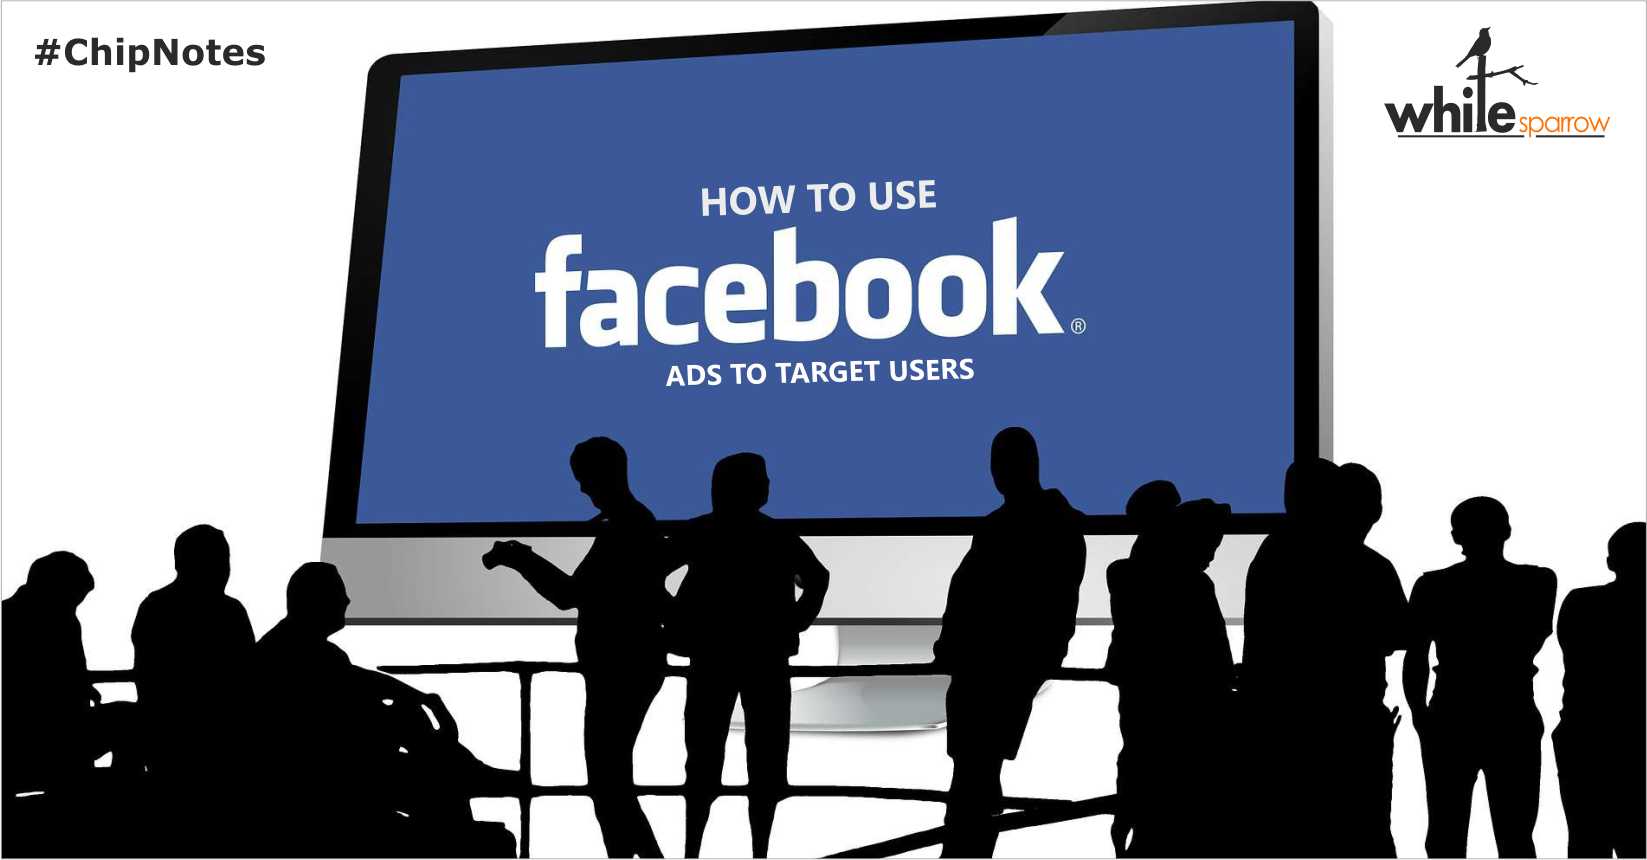 How to use Facebook ads to target users